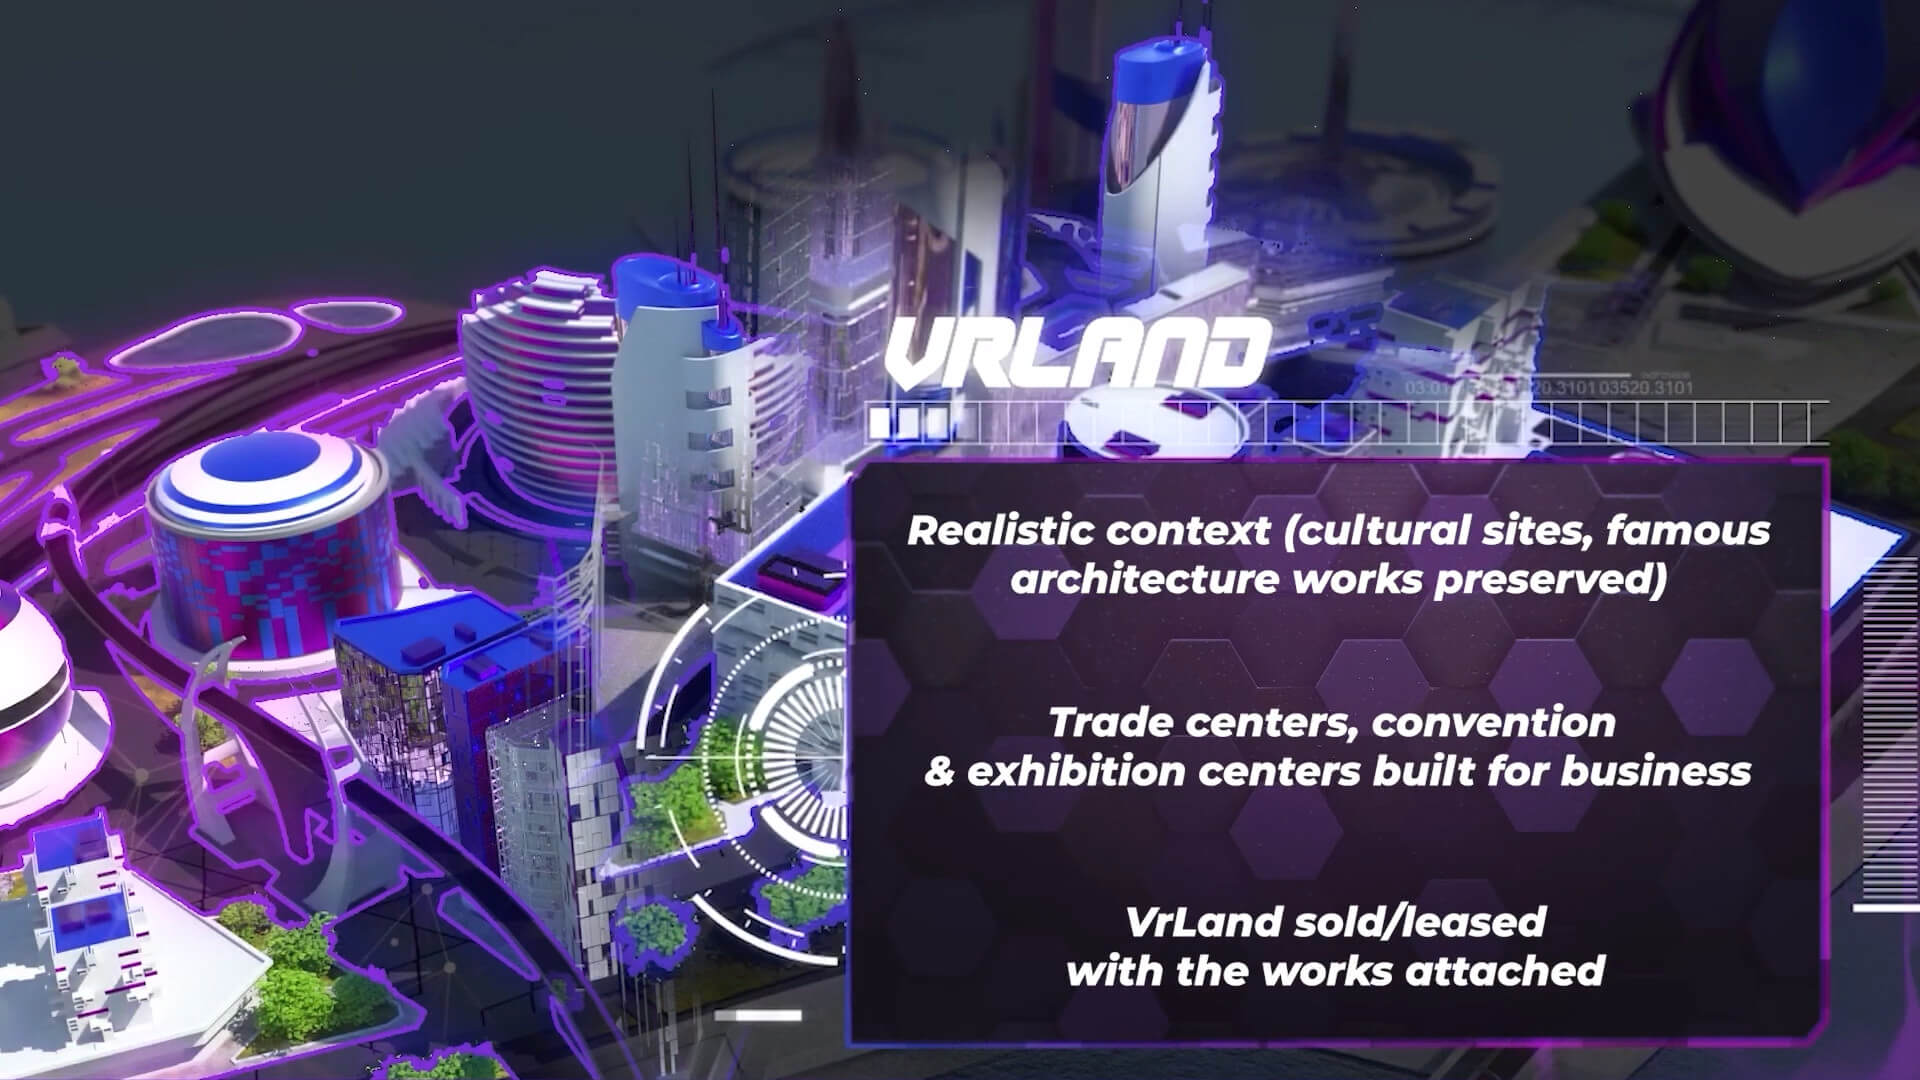 What is VrLand?